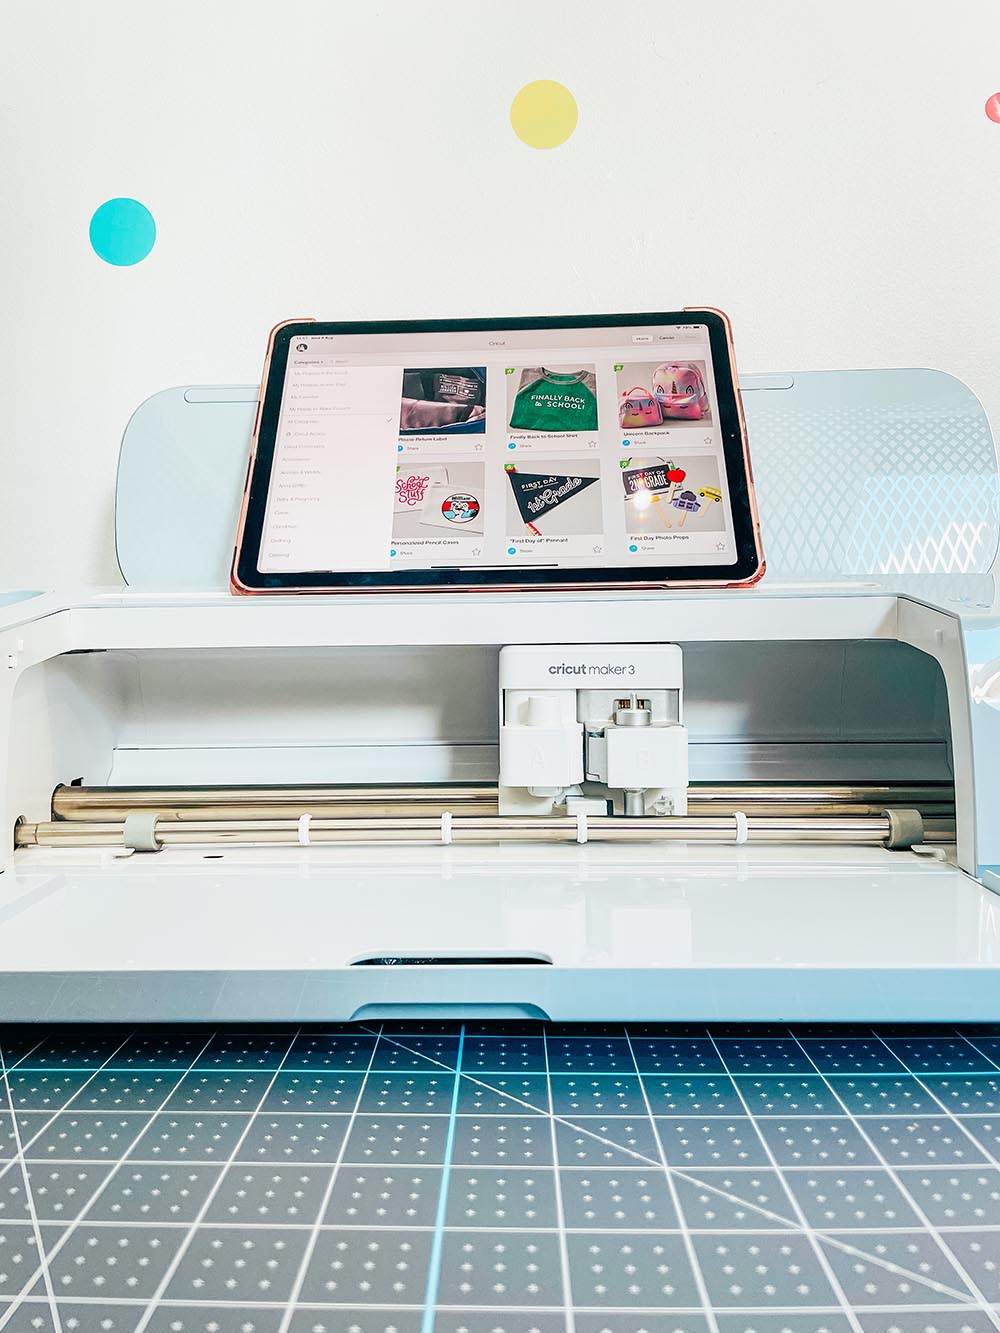 Do you need an pc to use the Cricut maker 3